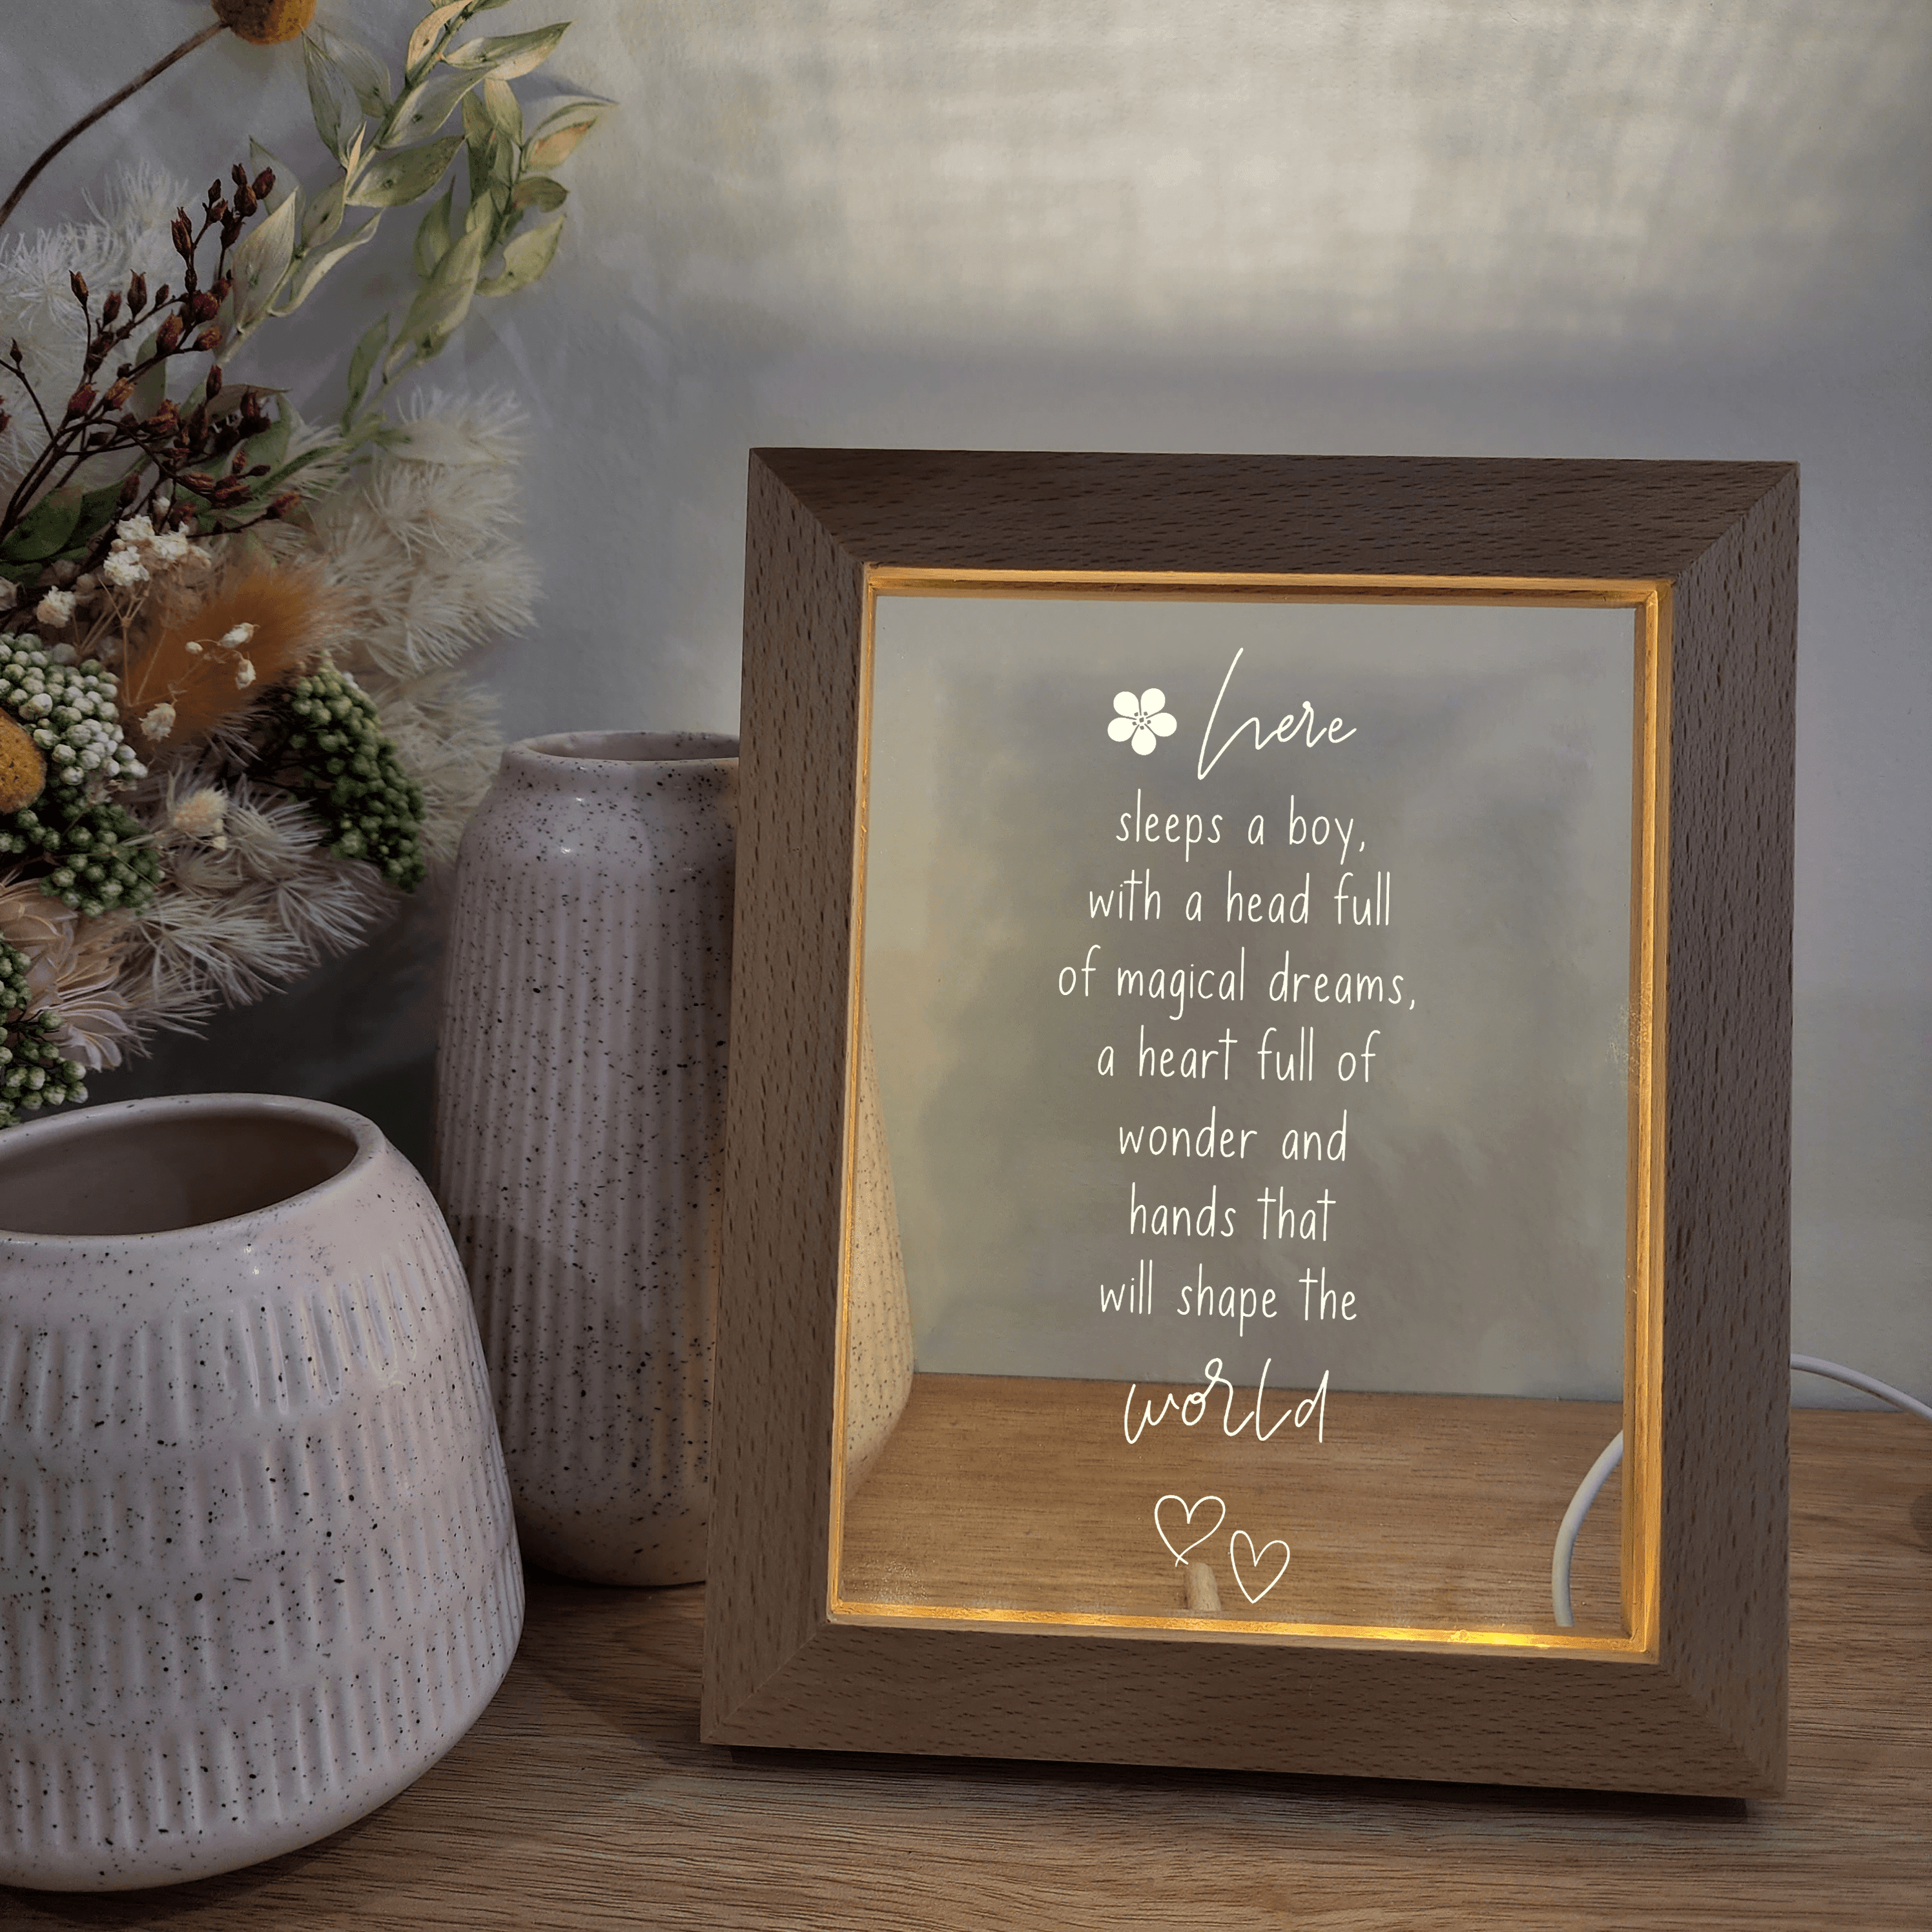 Timber Night Light Frame 🌙 - Quote - Here Sleeps a Boy - The Willow Corner